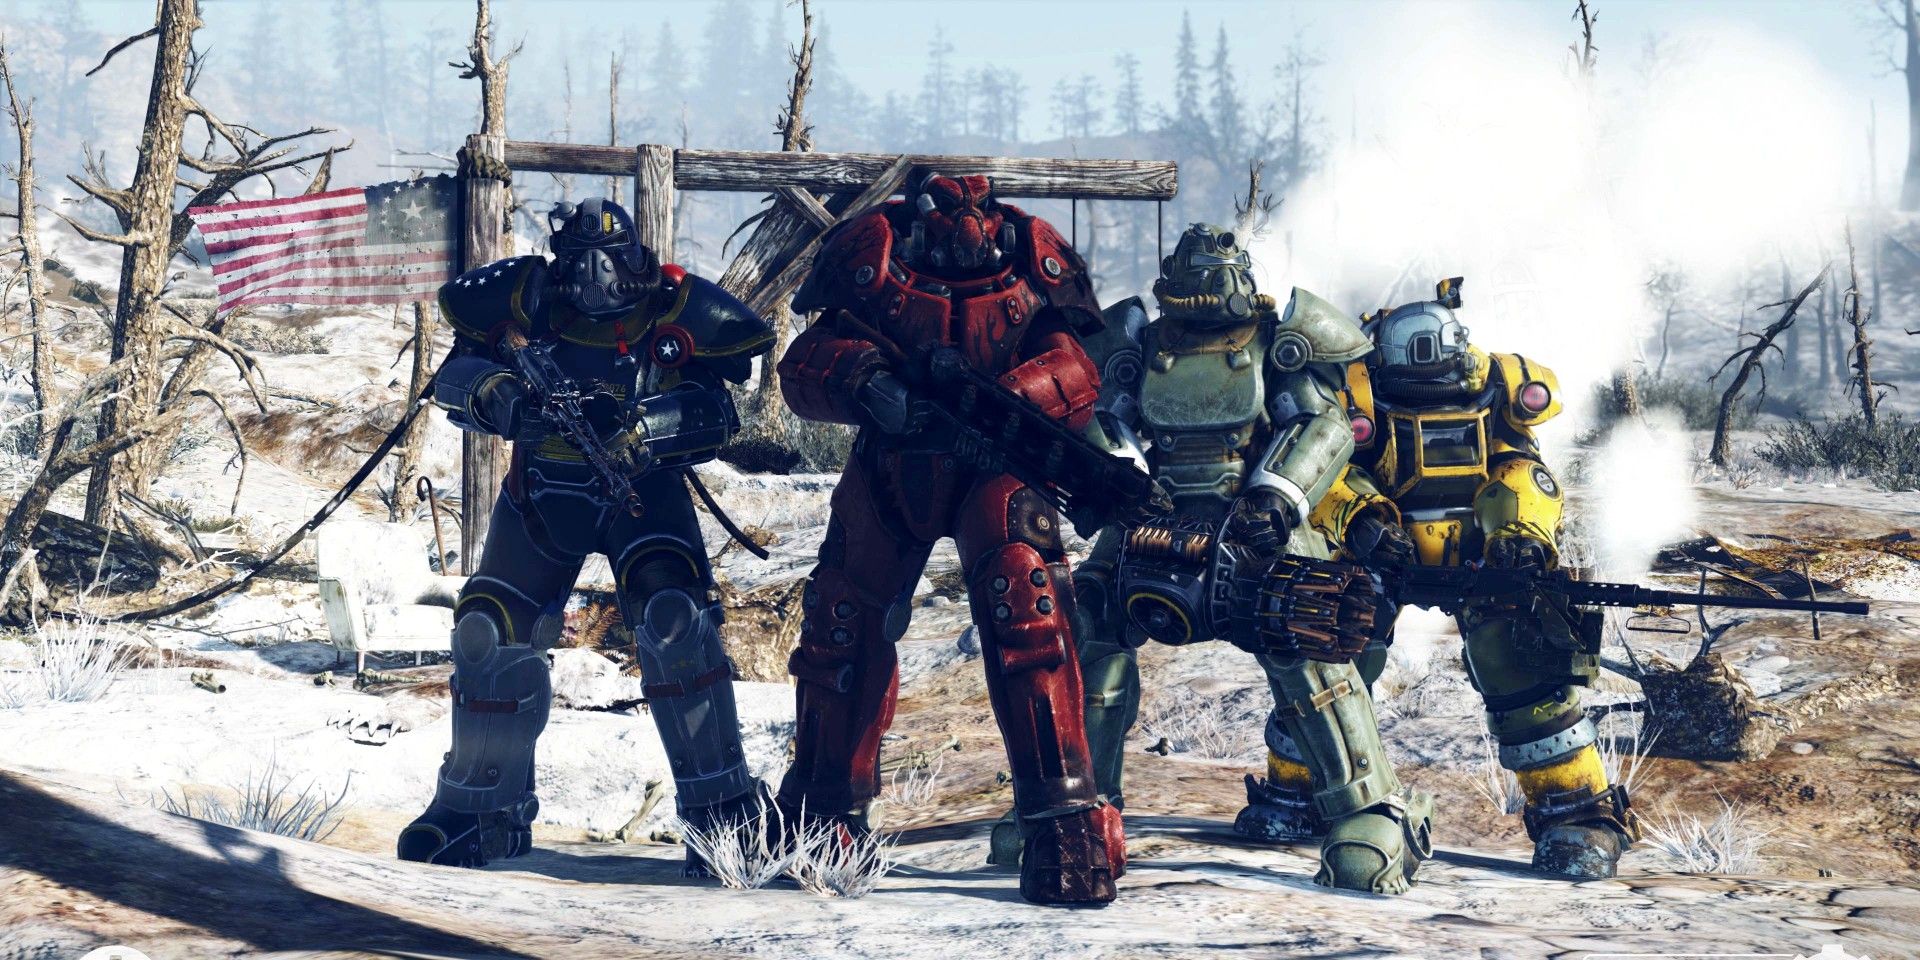 The Best Builds To Use In Fallout 76